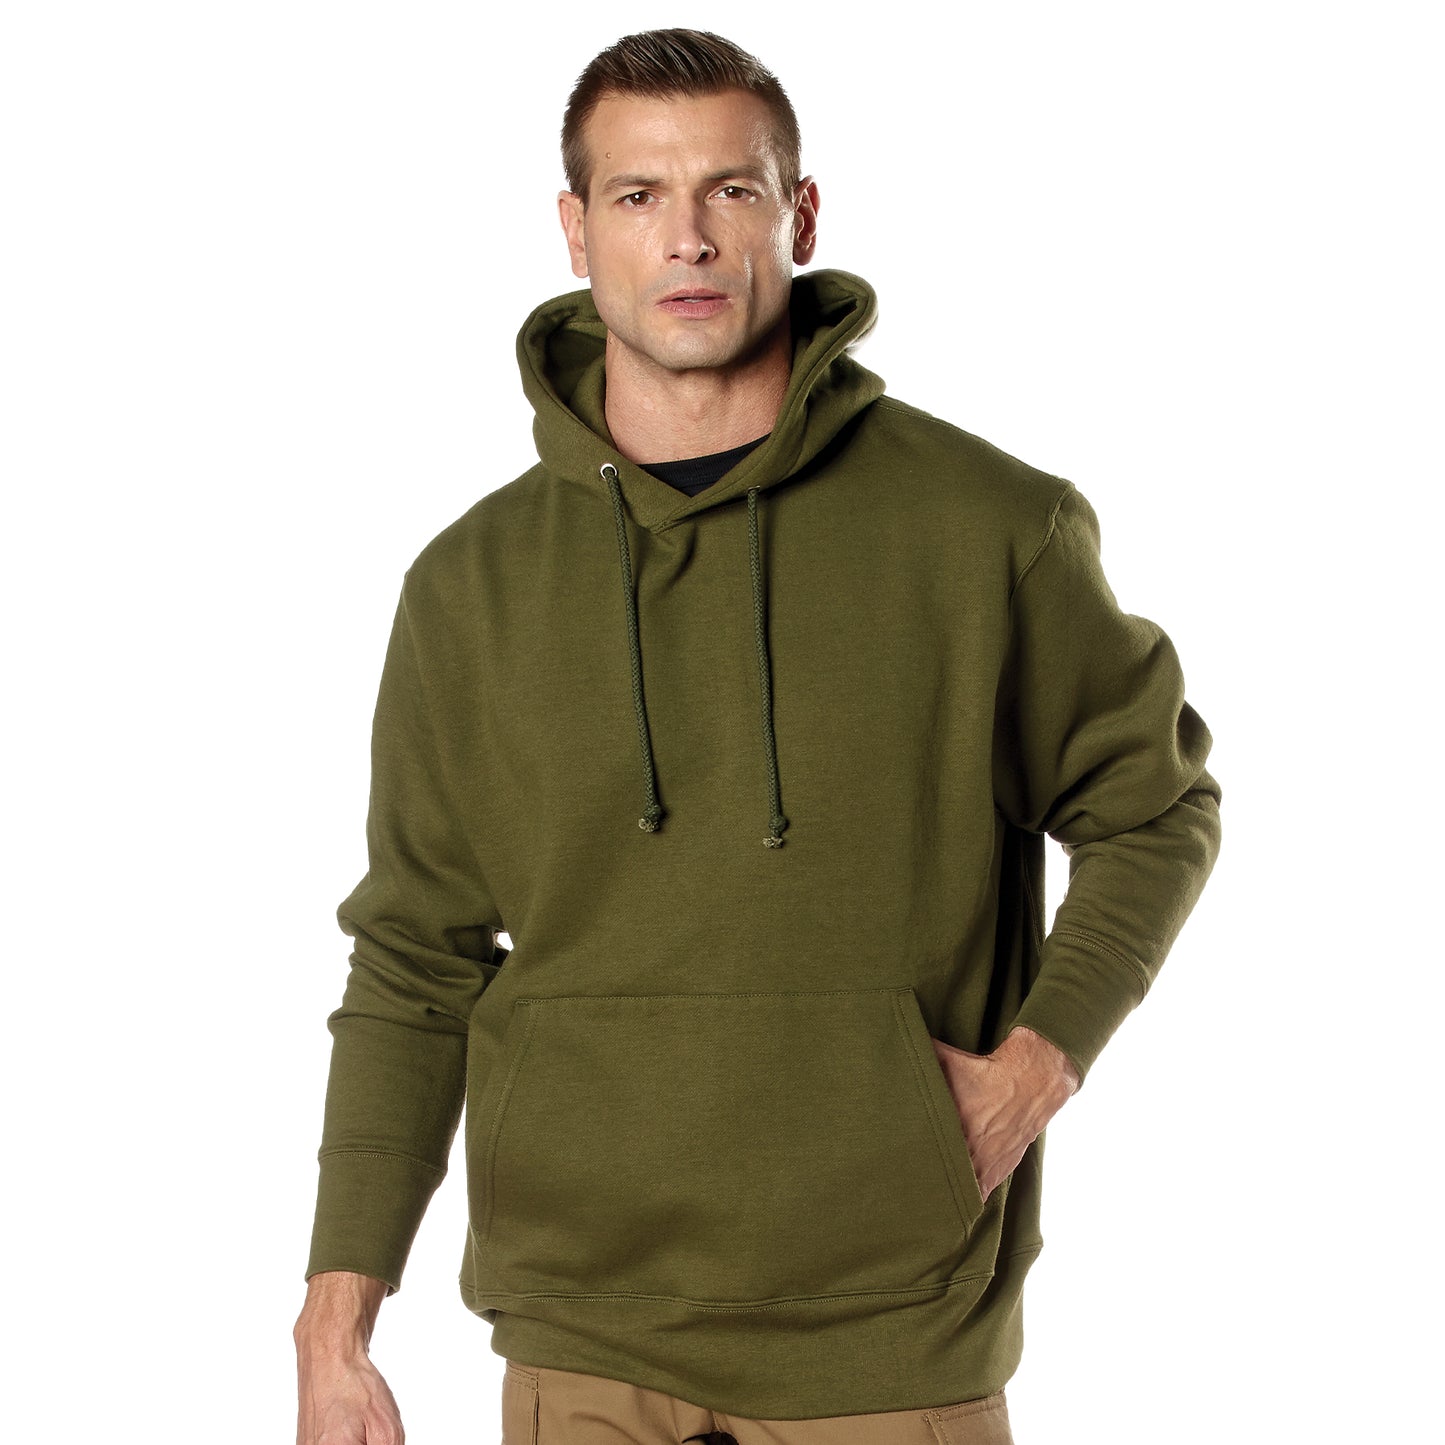 Every Day Pullover Hooded Sweatshirt